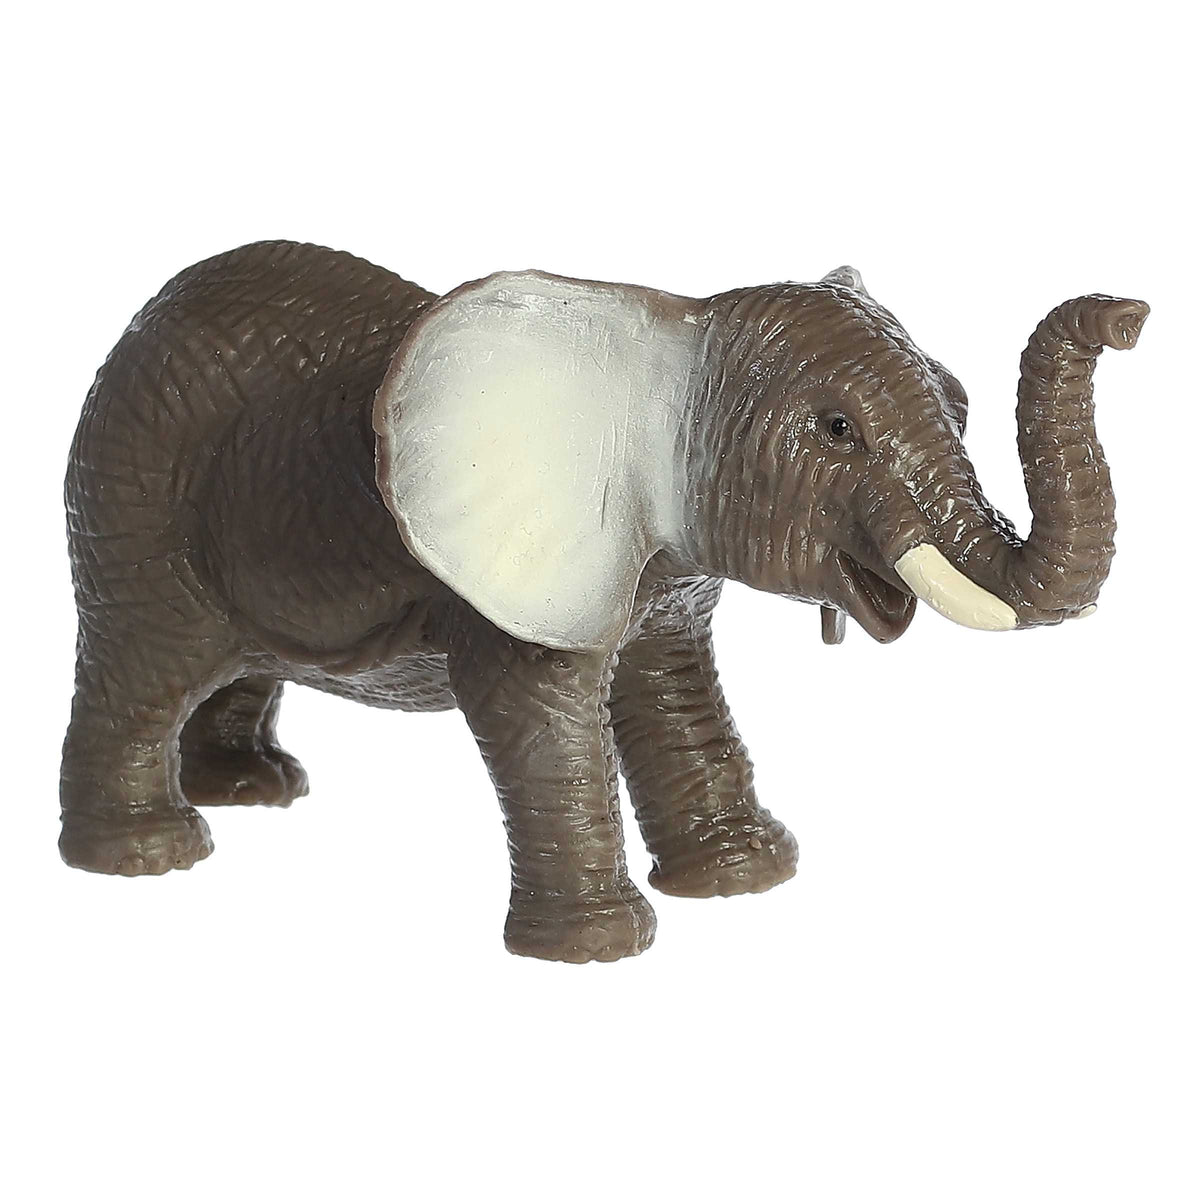 The Elephant Squish from Aurora Toys, with detailed grey elephant toy design and detailed texture